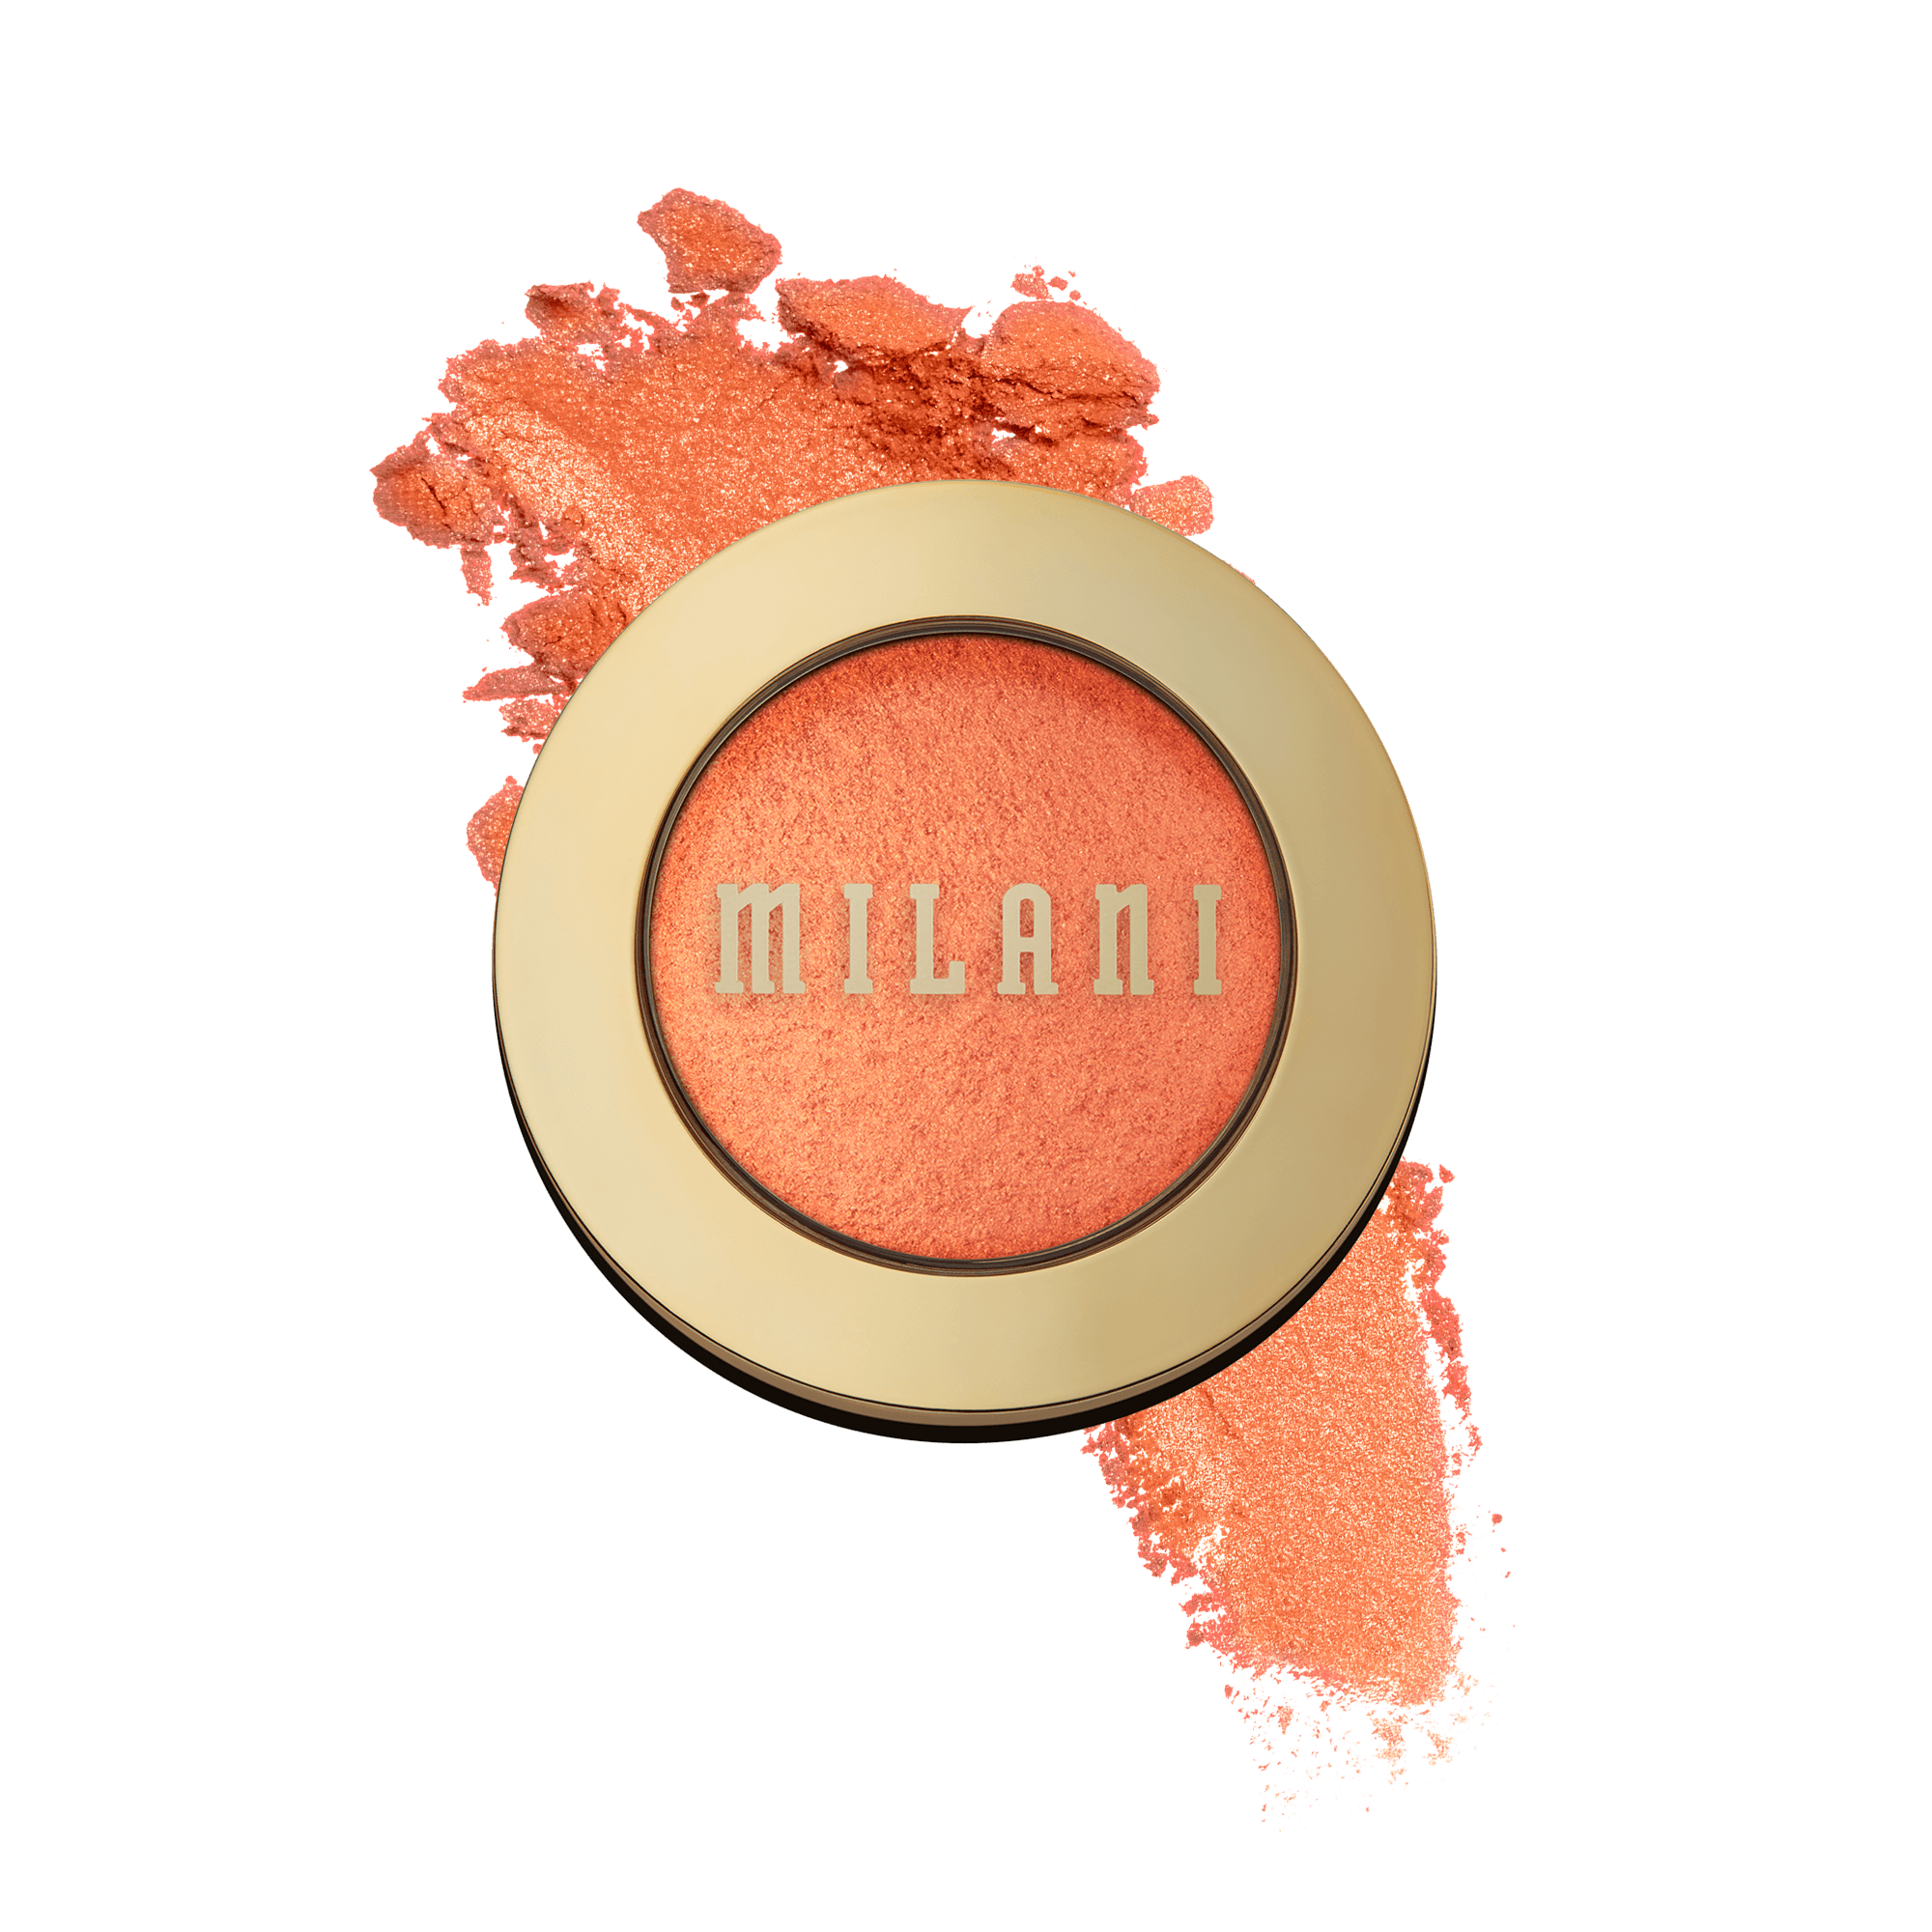 Milani Baked Blush - Dolce Pink (0.12 Ounce) Cruelty-Free Powder Blush -  Shape, Contour & Highlight Face for a Shimmery or Matte Finish